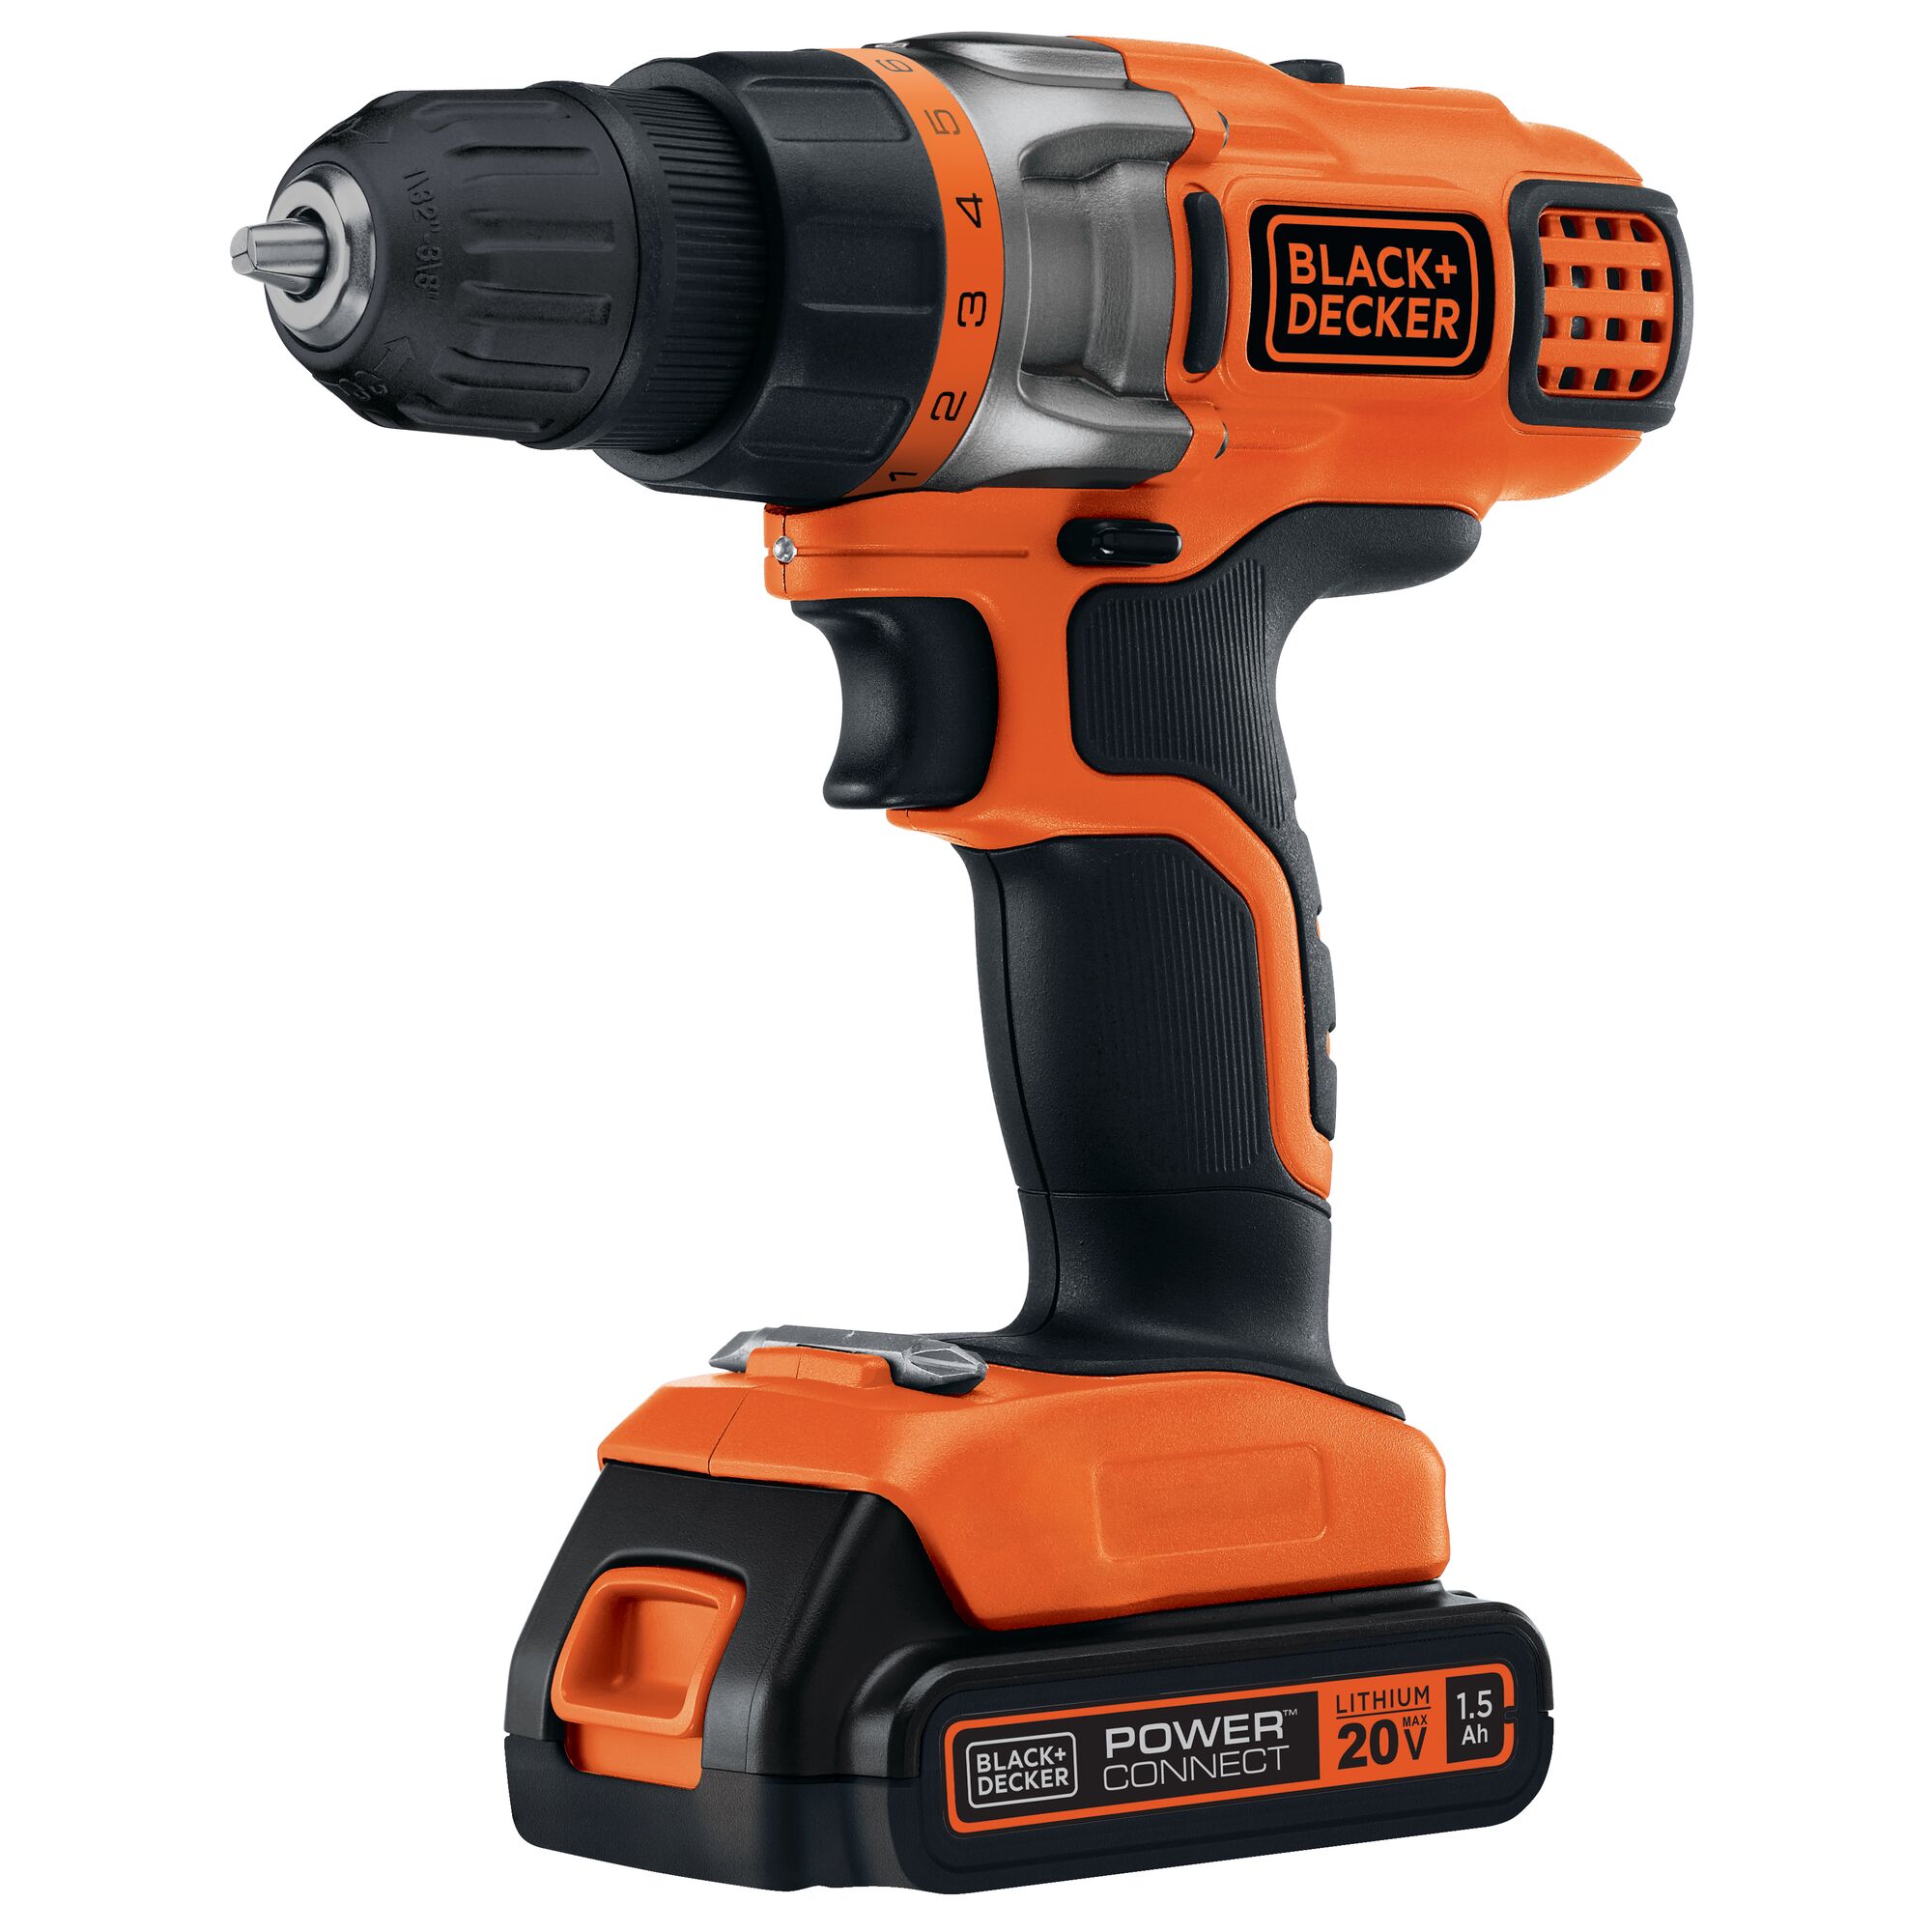 Profile of Lithium 2 Speed Drill Driver.